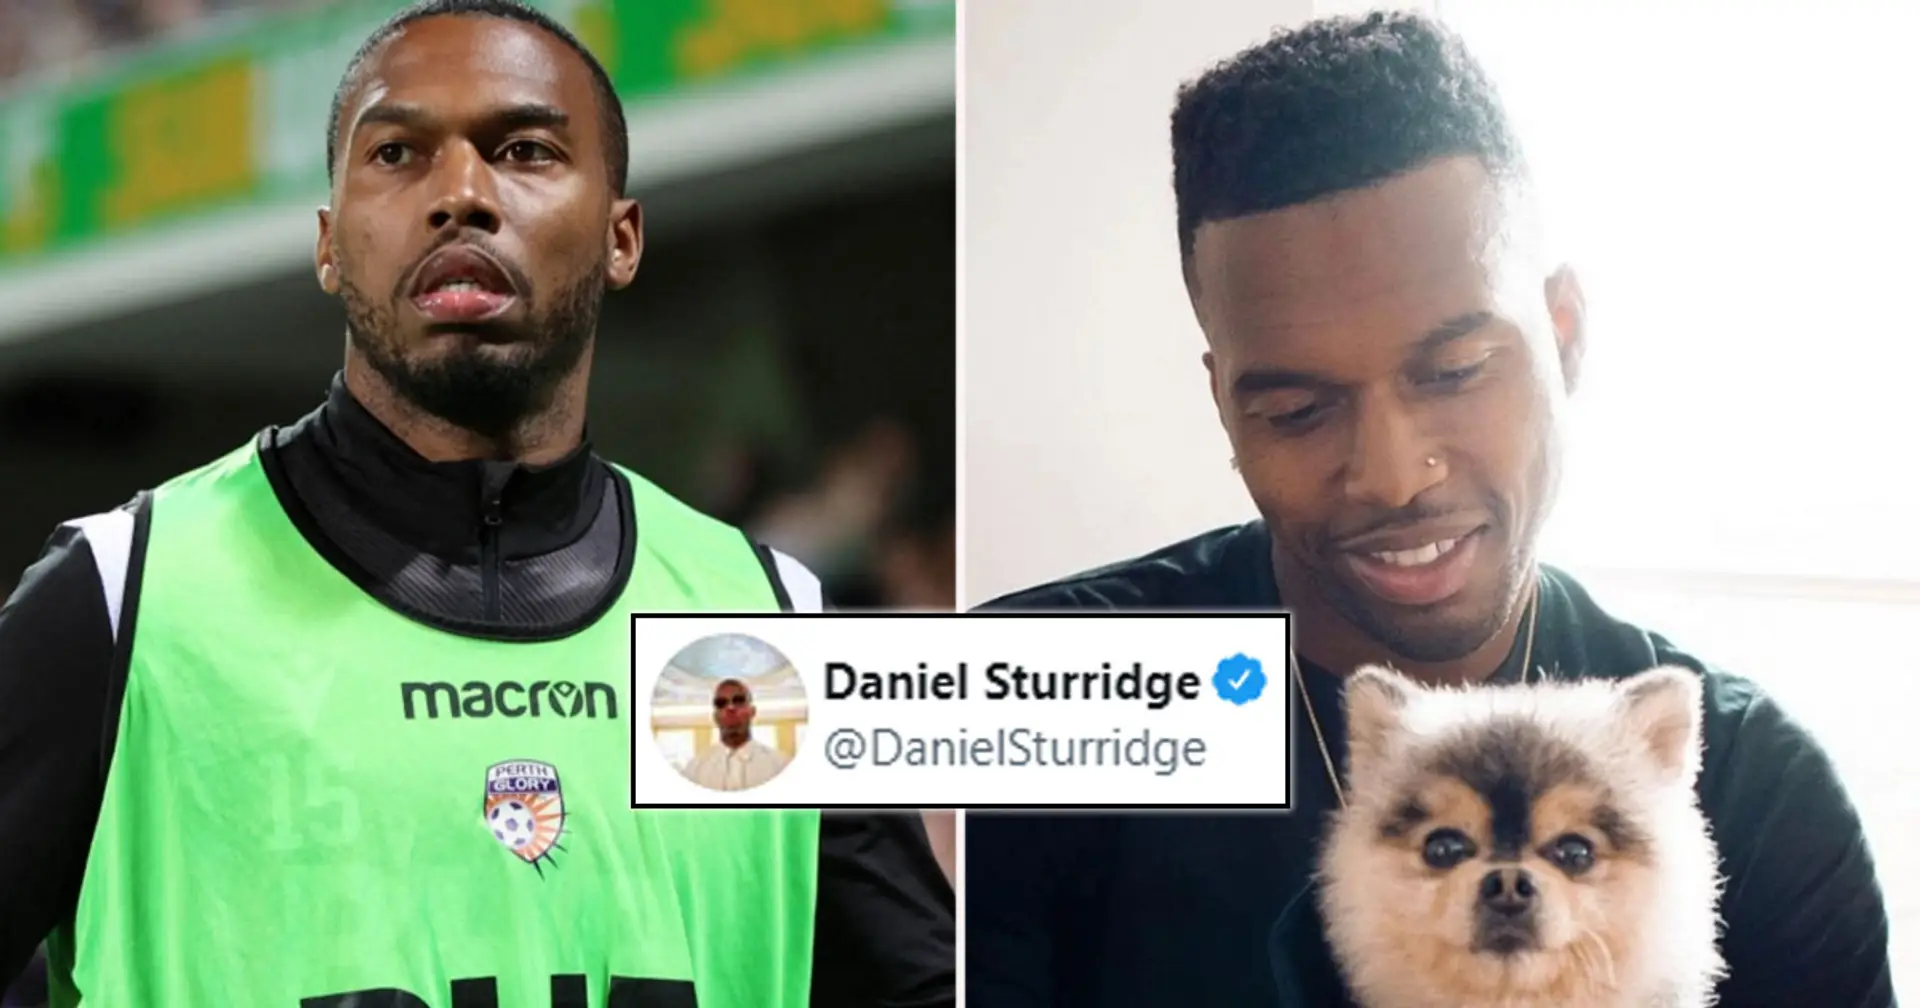 Daniel Sturridge responds to accusations of failing to pay reward for his lost dog